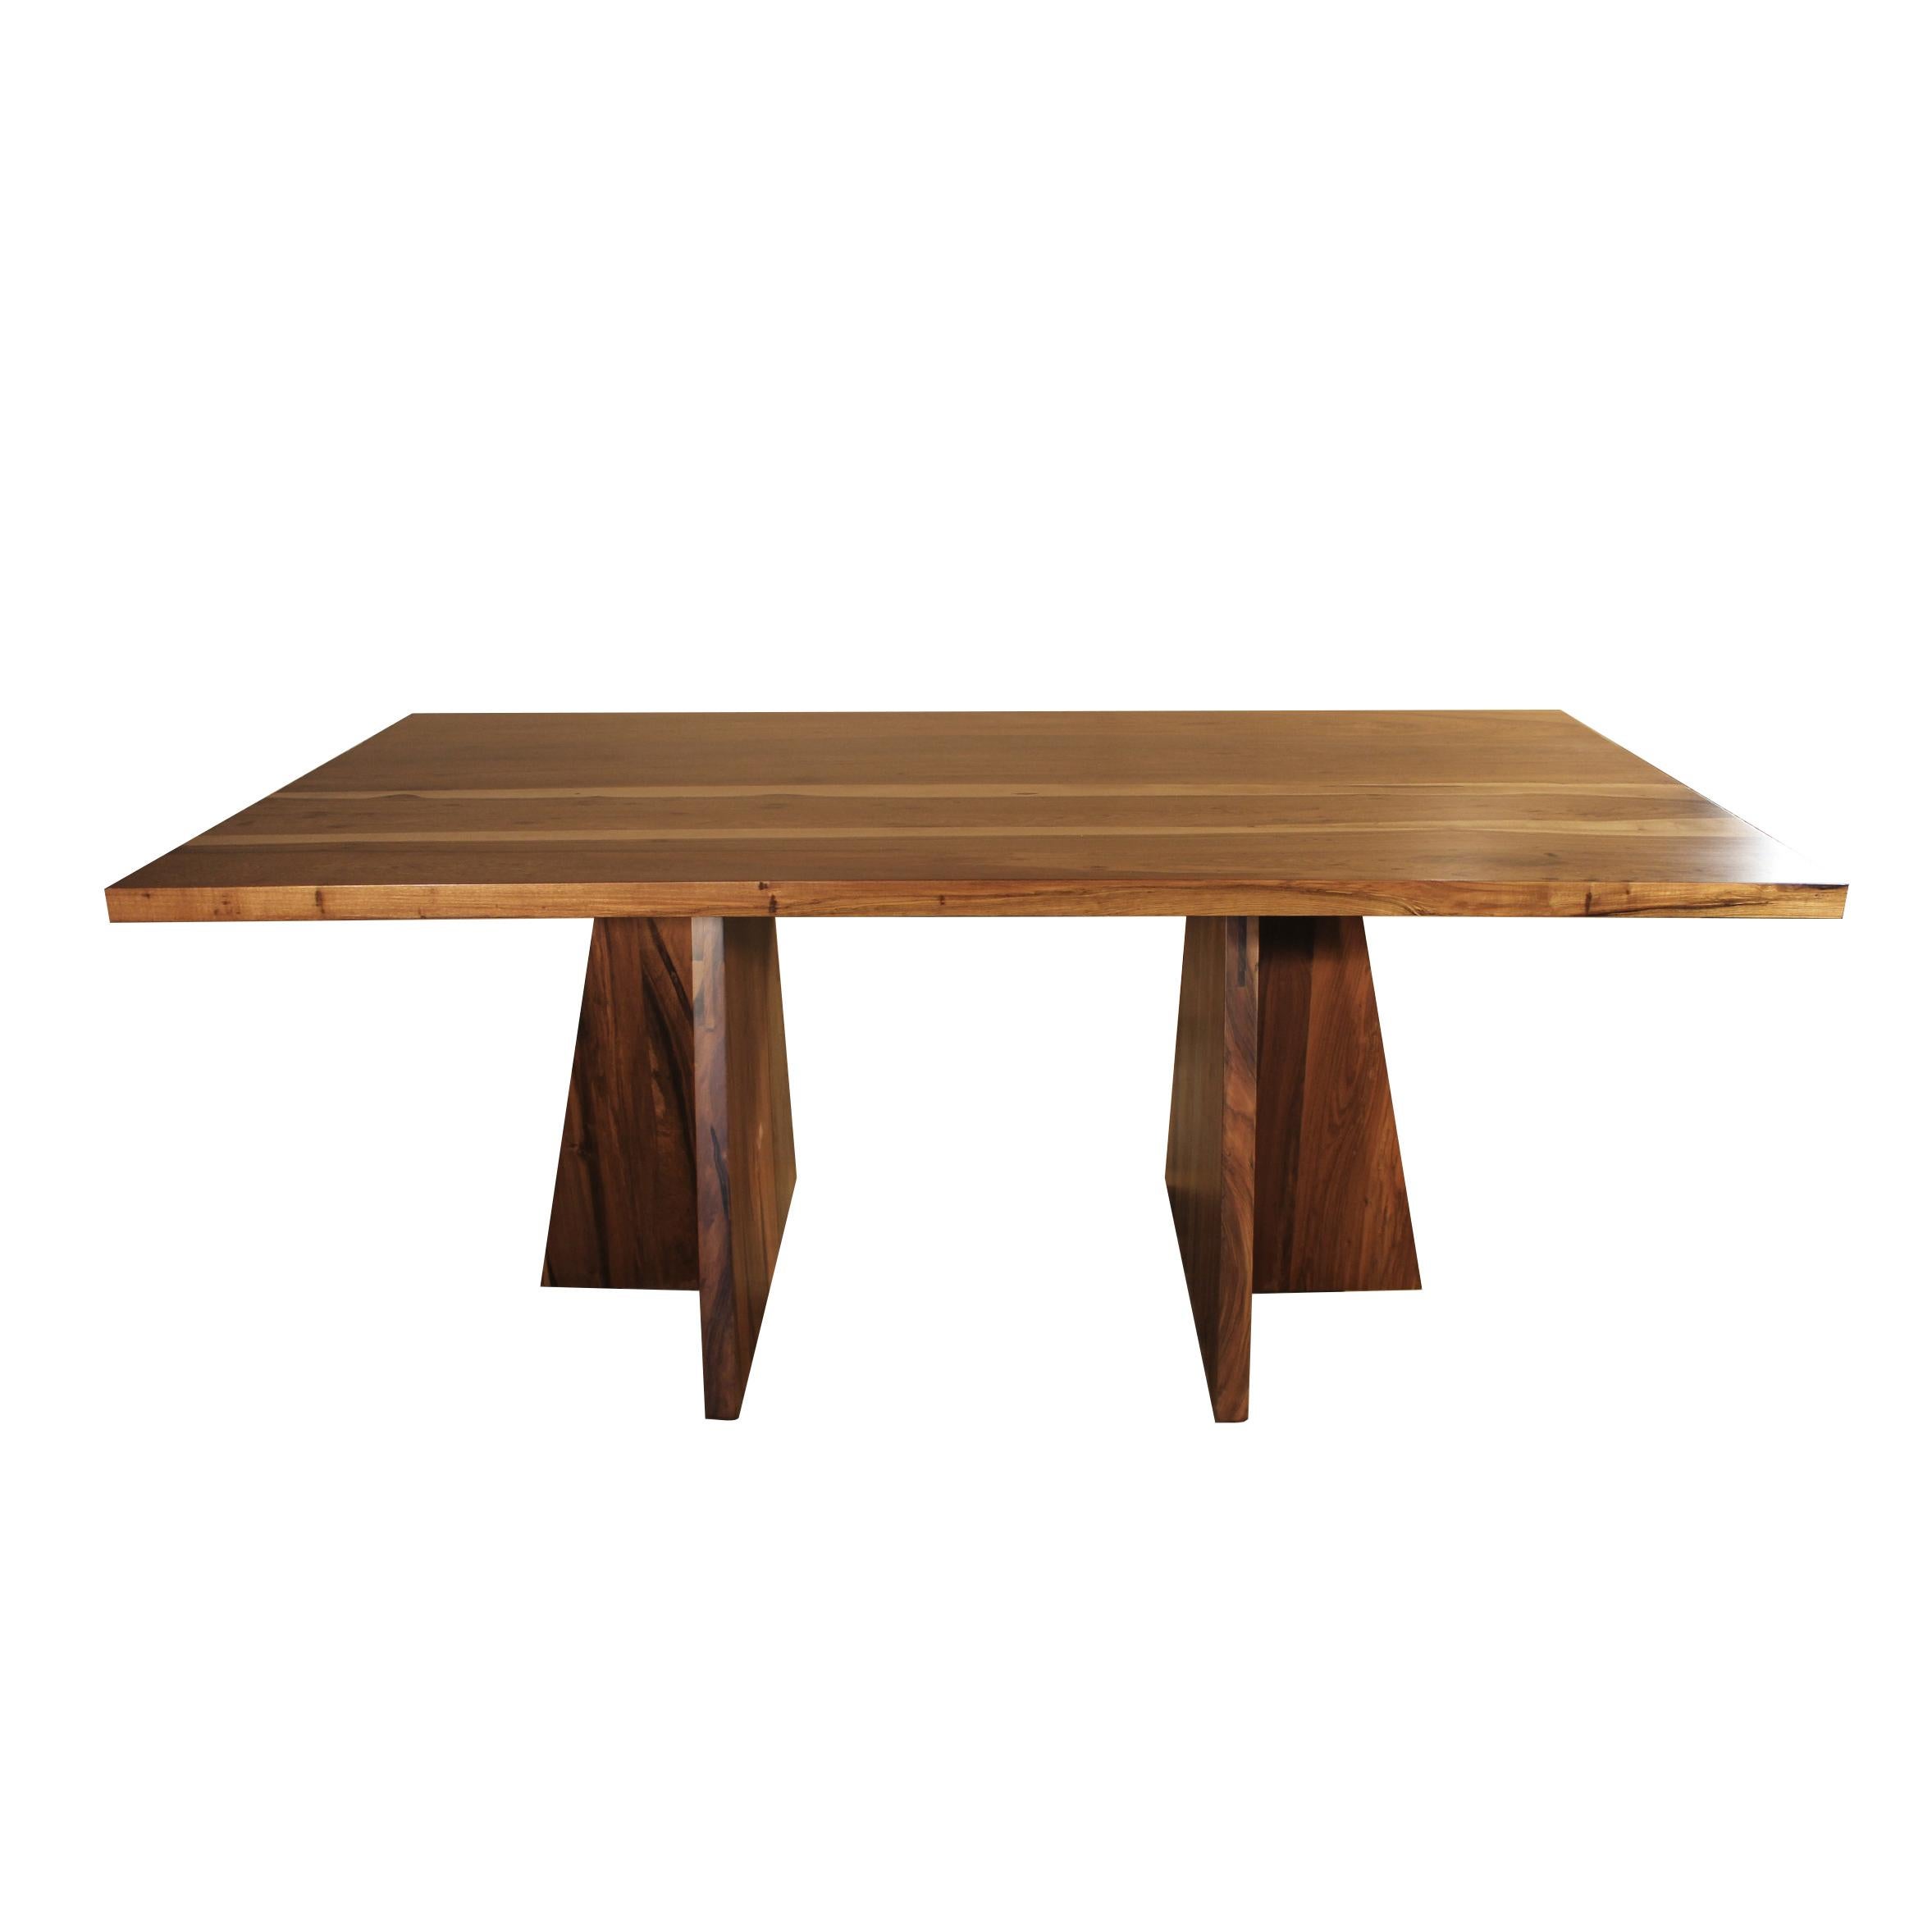 The Luca table is one of Costantini’s signature and most specified pieces. It is shown in Argentine Rosewood finish, and is extremely colorful and durable. The design itself is understated and architectural in nature and lets the material take